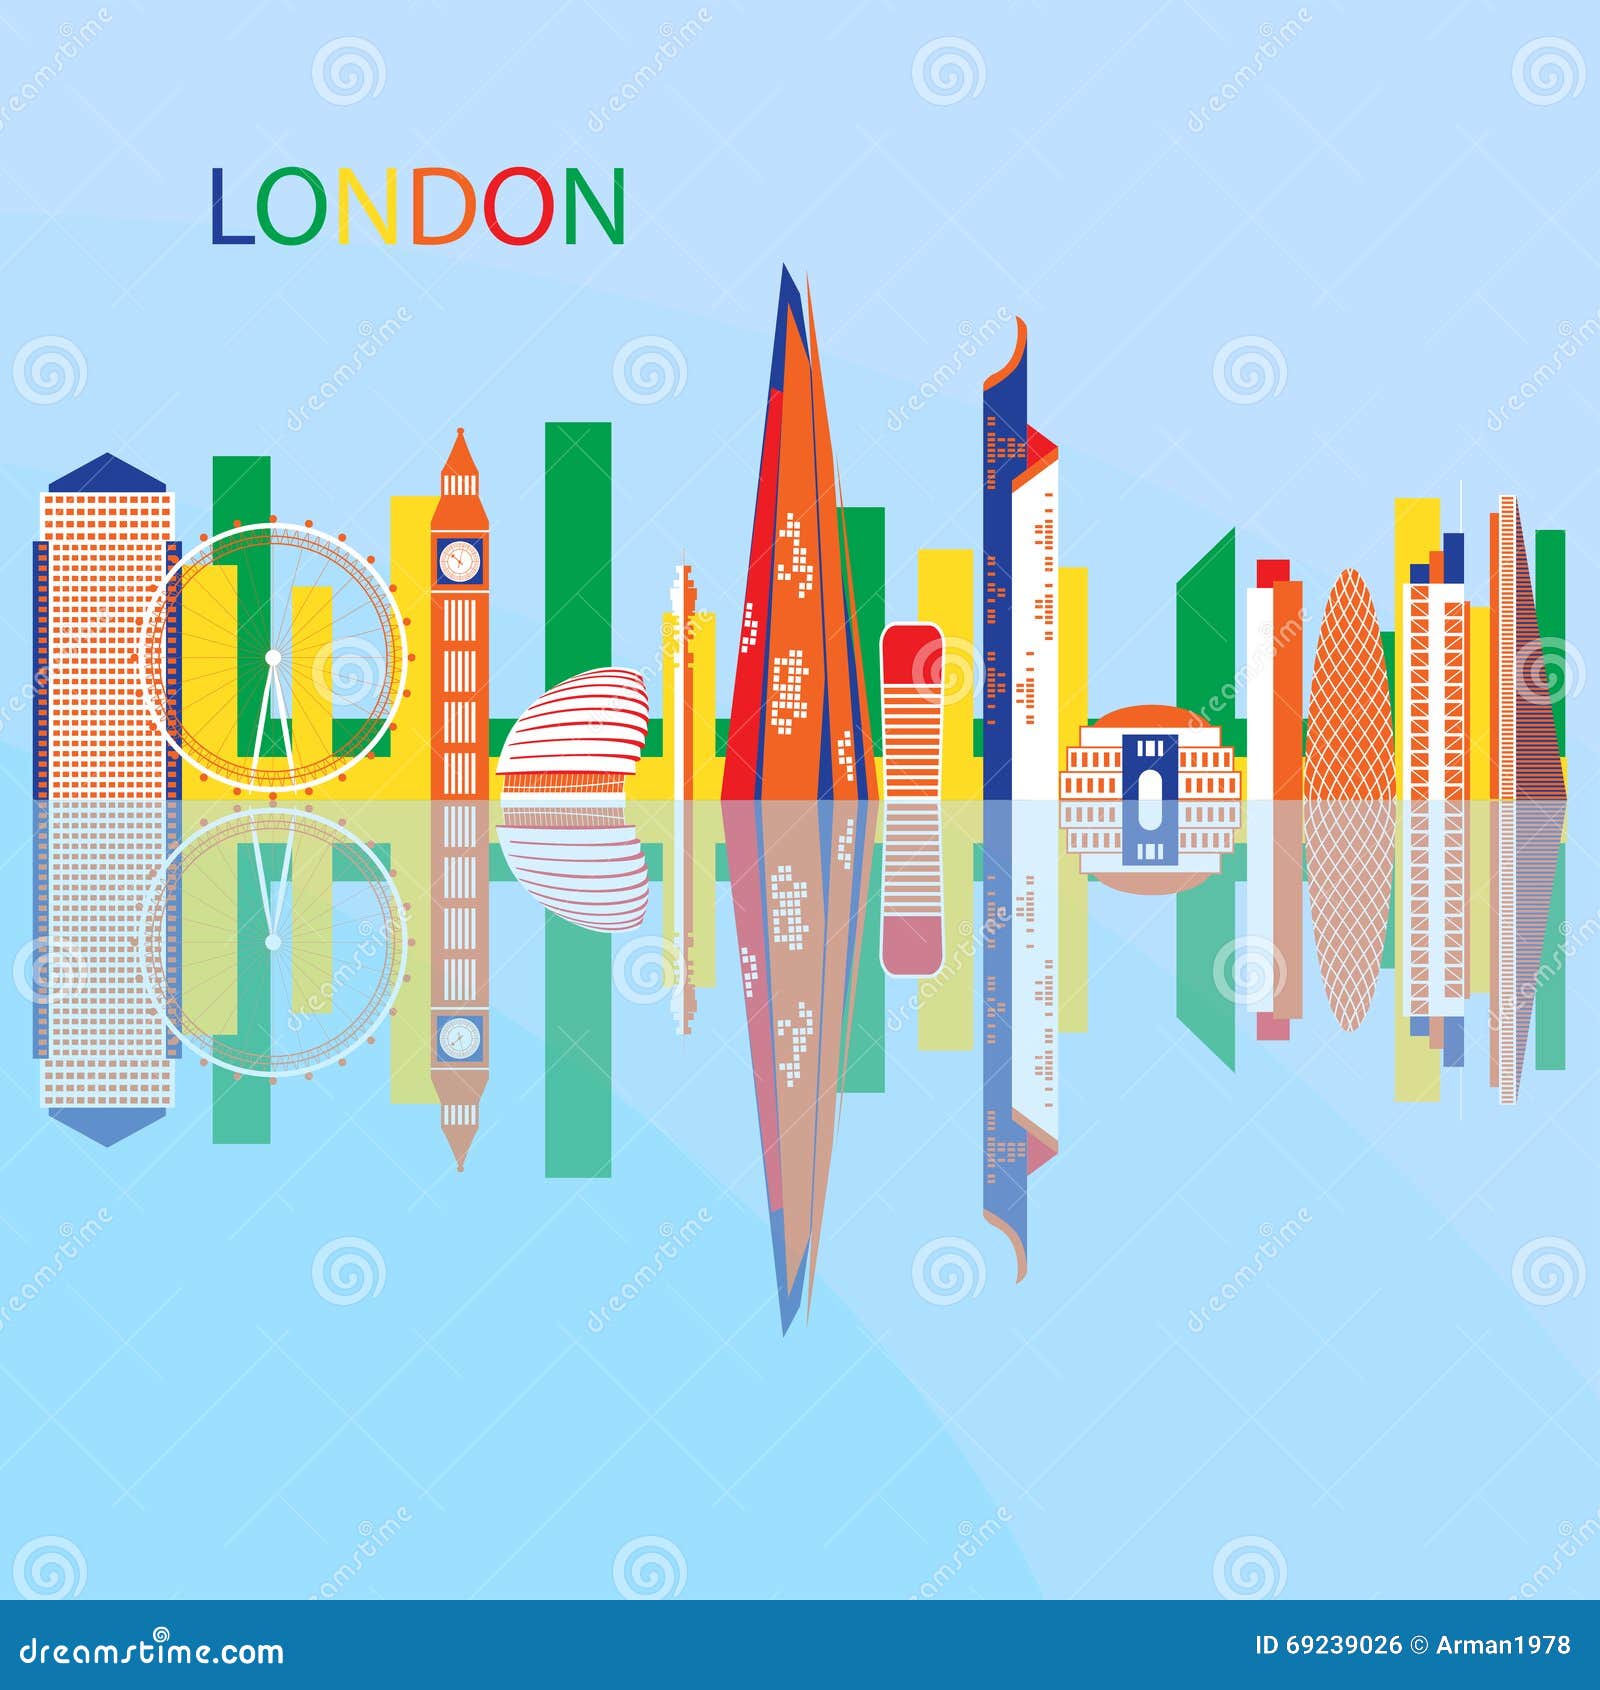 londres capitales - Image